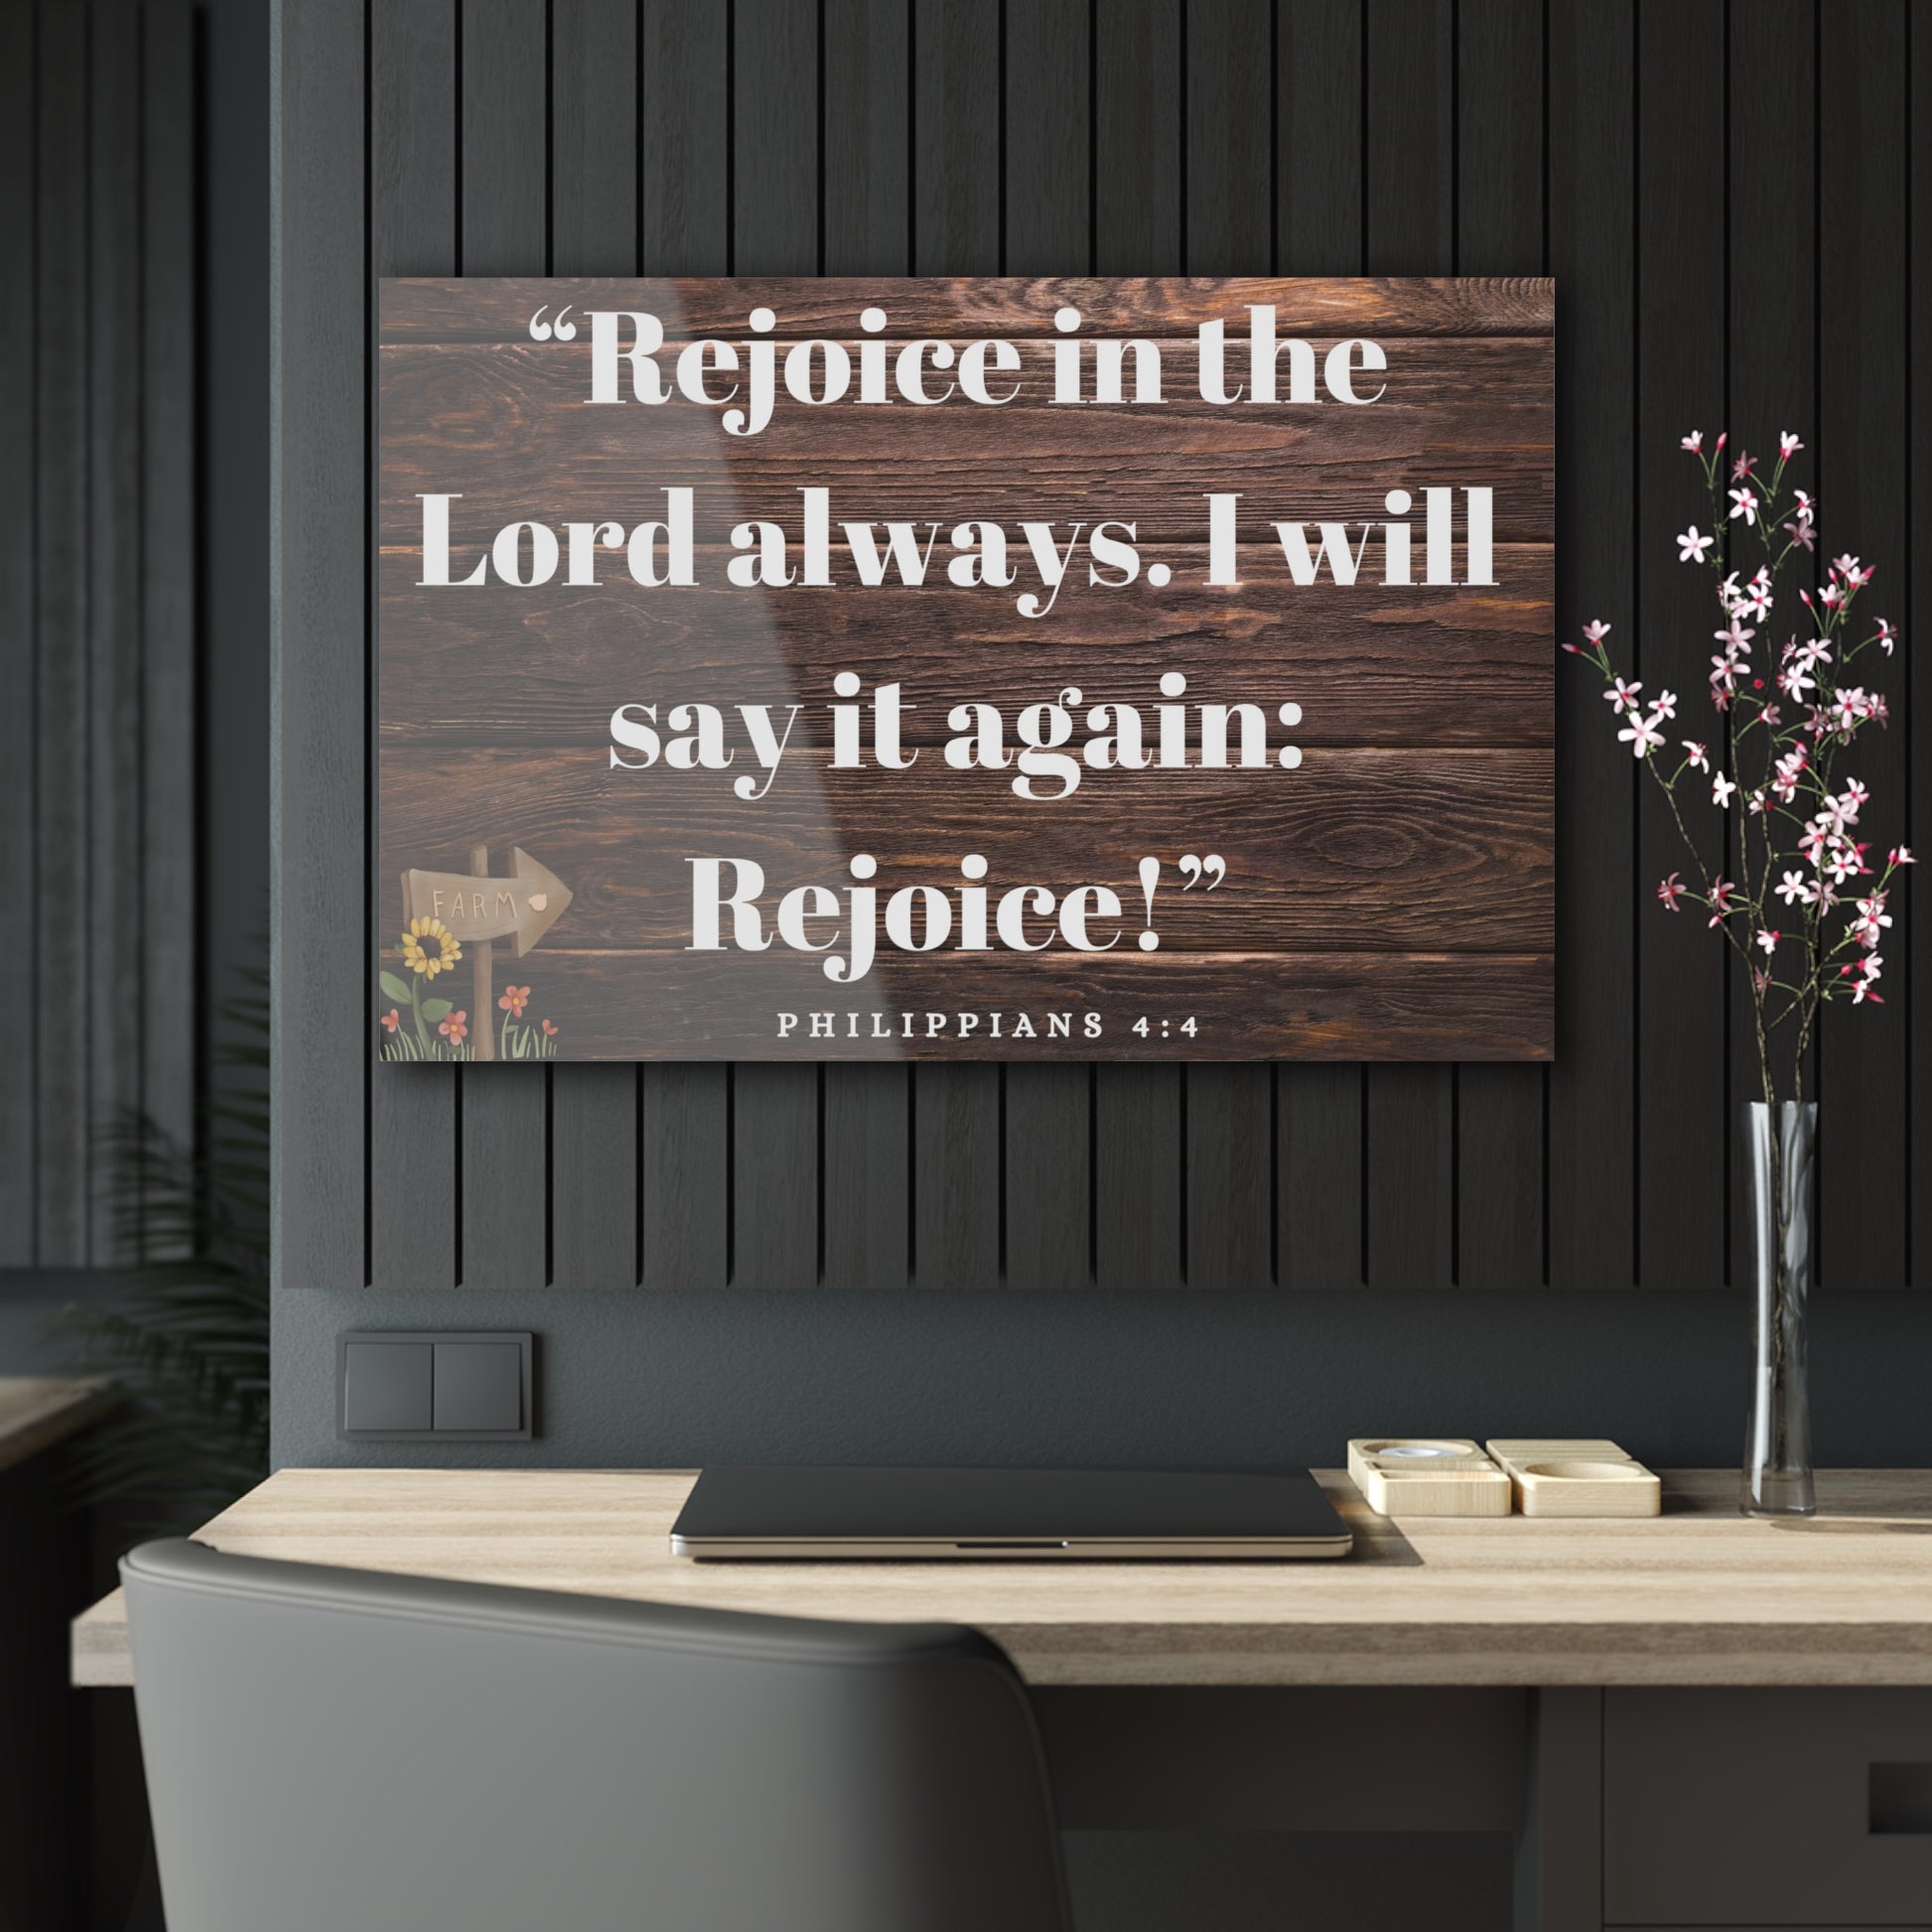 Farm House Wall Decor - Acrylic Print with Inspirational Scripture | Art & Wall Decor,Assembled in the USA,Assembled in USA,Decor,Home & Living,Home Decor,Indoor,Made in the USA,Made in USA,Poster